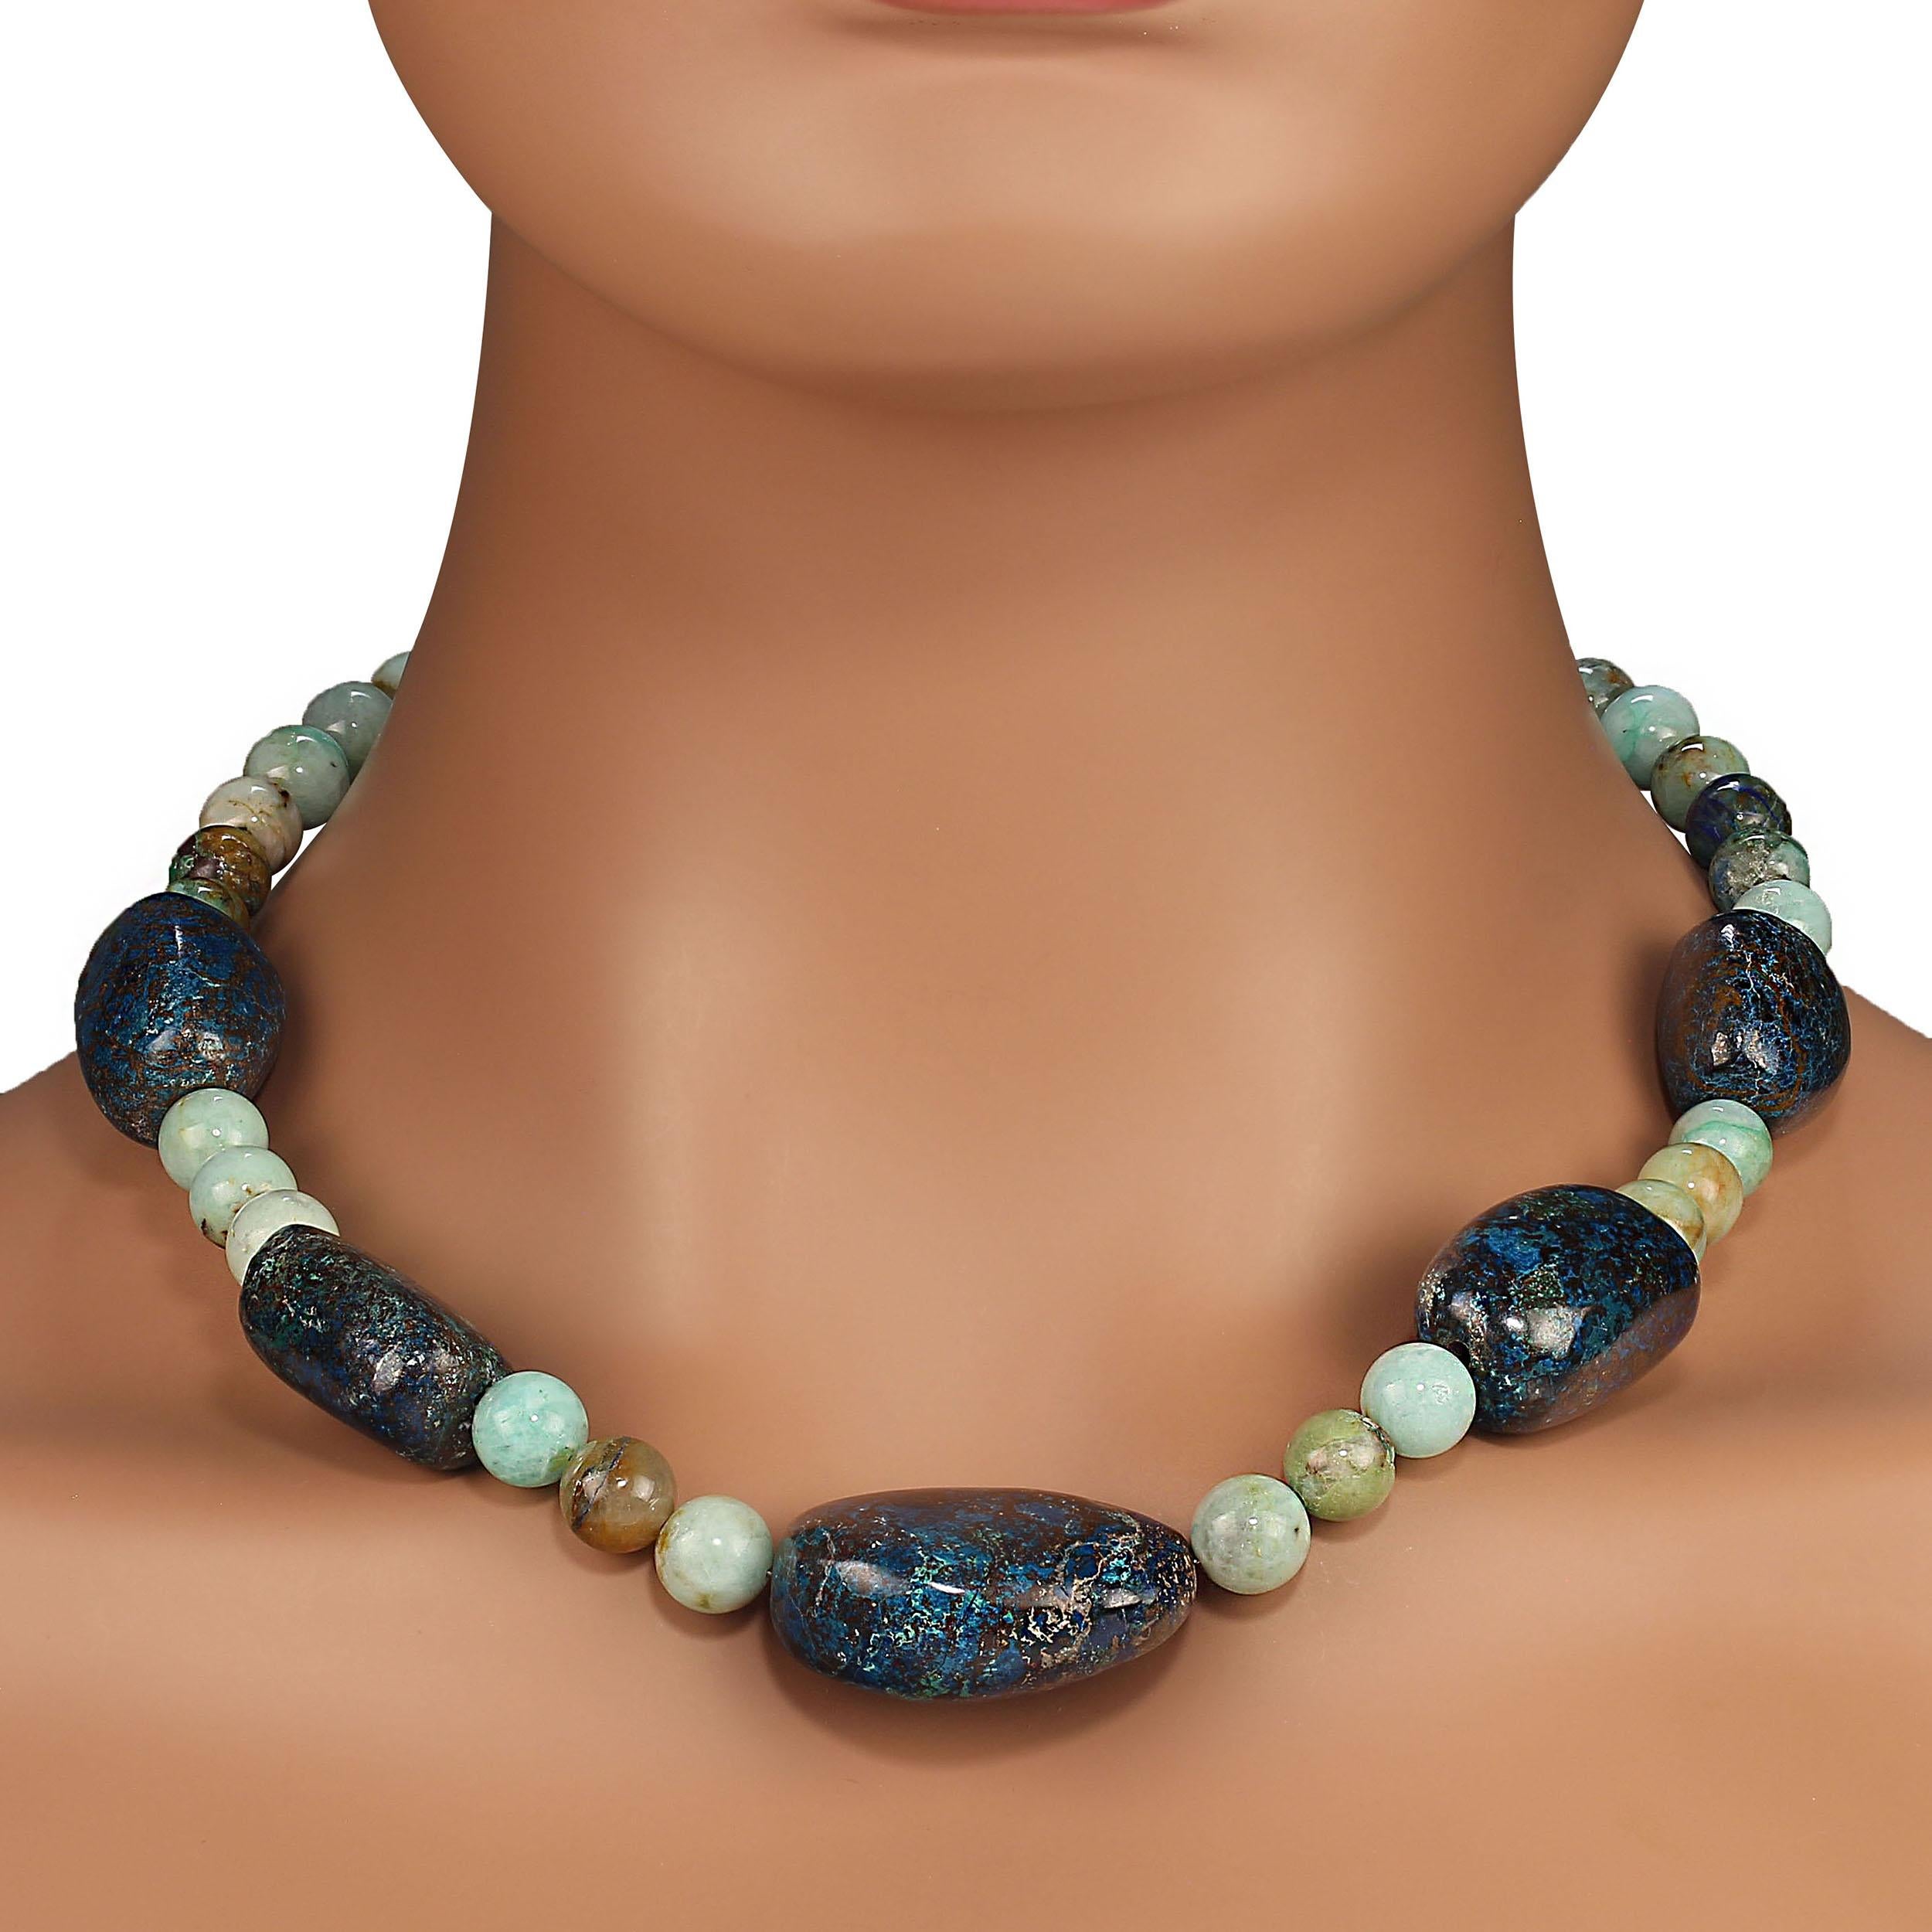 AJD 19 Inch Chrysocolla Statement necklace with Gorgeous Focal pieces Great Gift